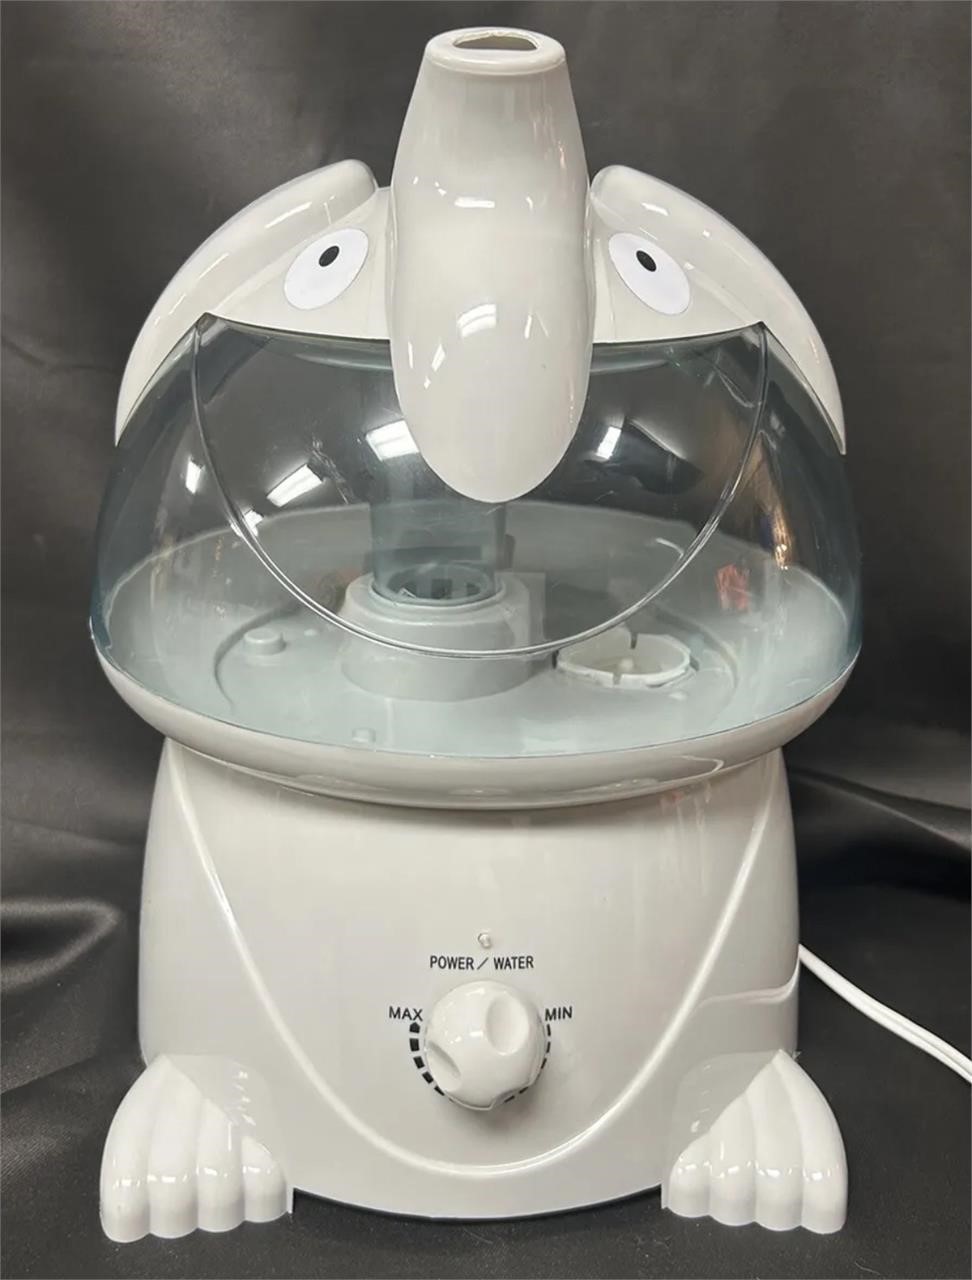 Elephant Humidifier tested working